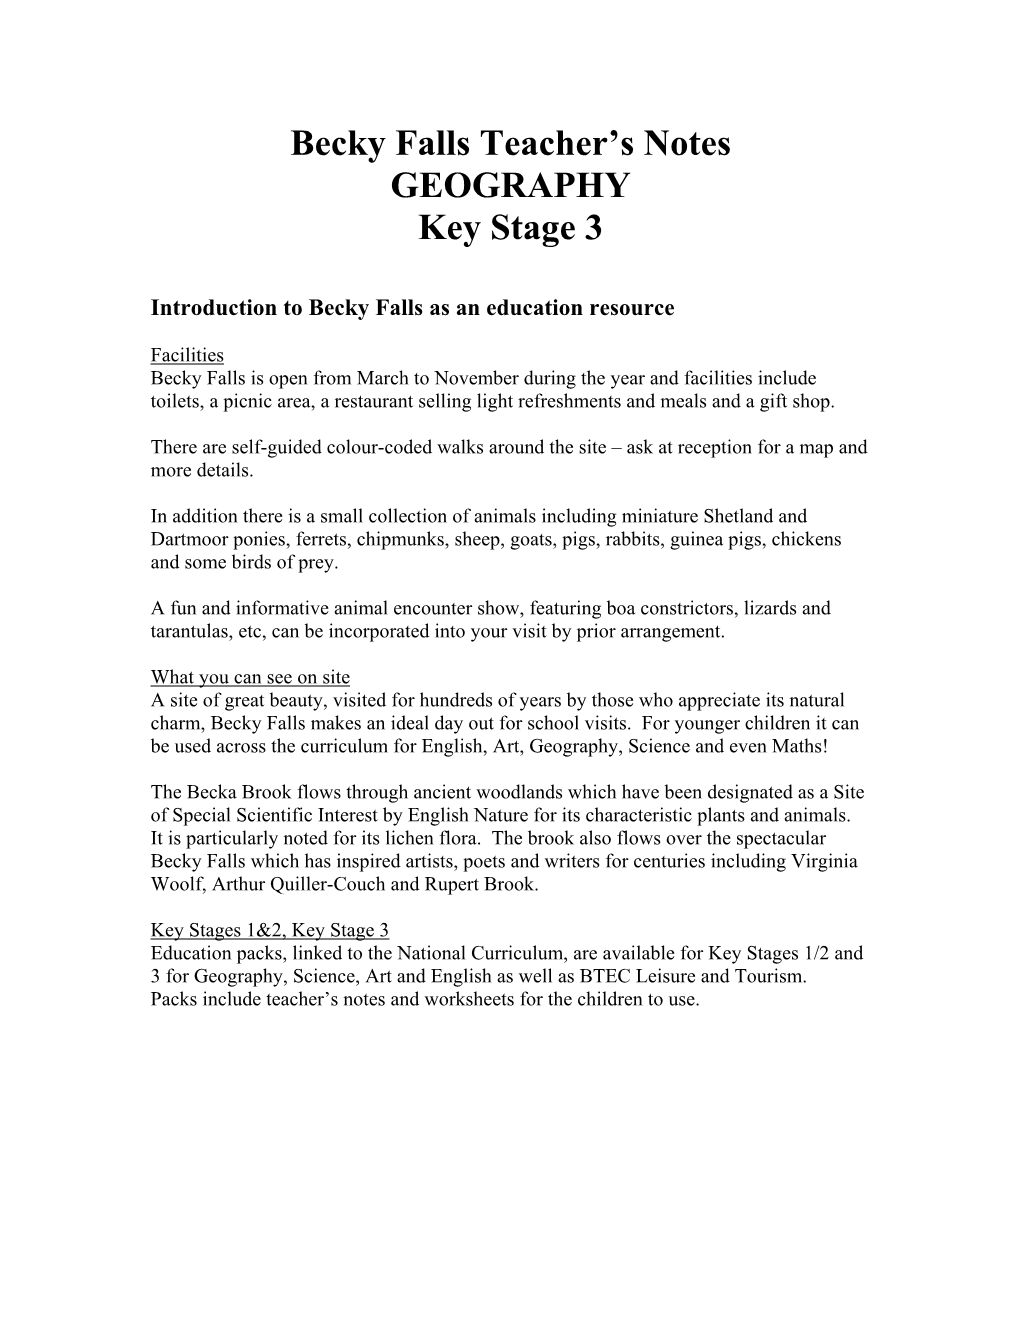 Becky Falls Teacher's Notes GEOGRAPHY Key Stage 3